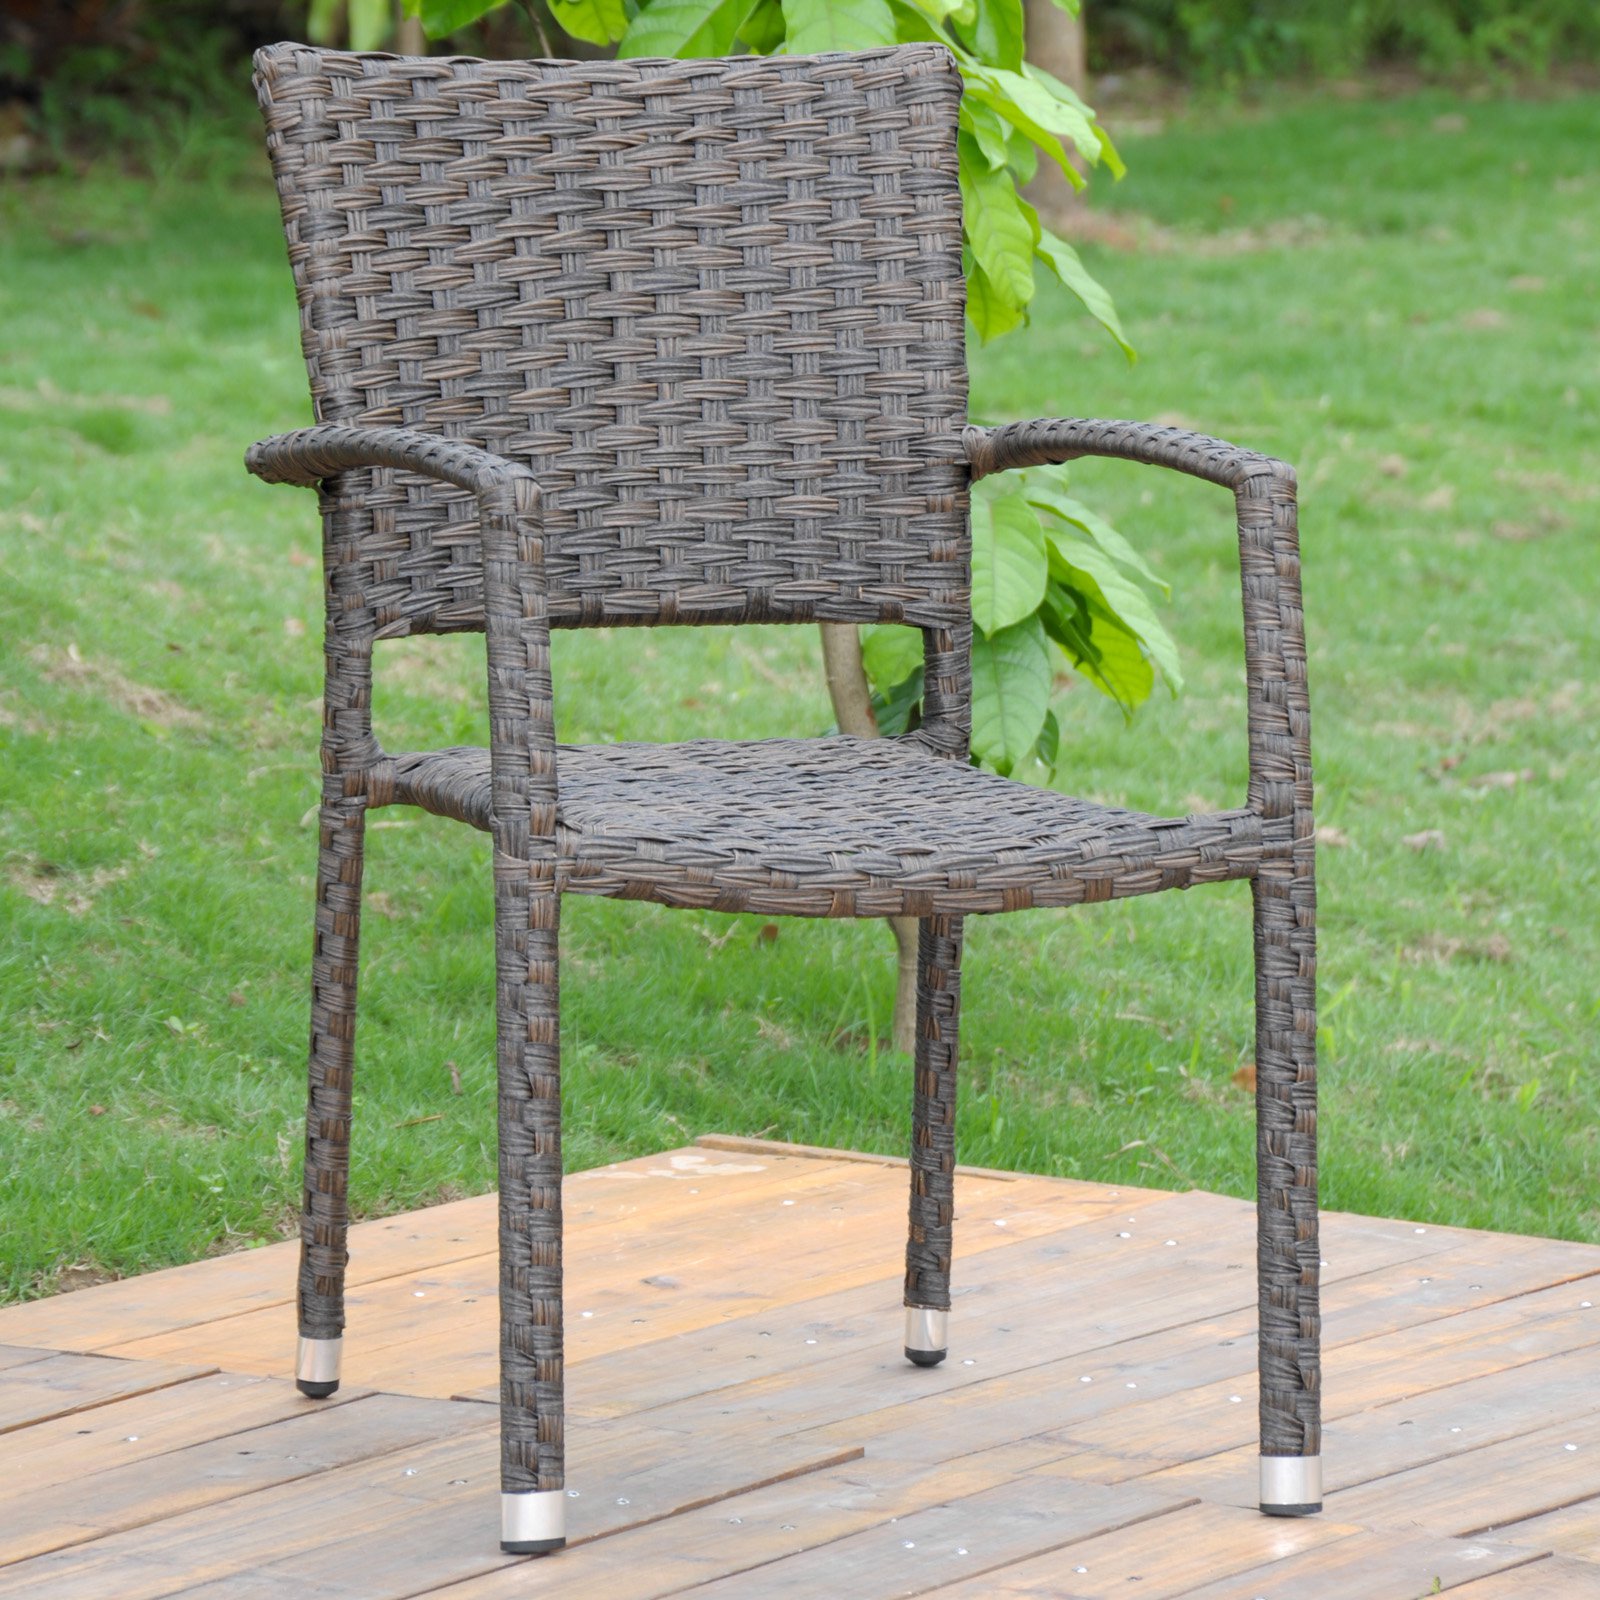 Ibiza Resin Wicker Aluminum Dining Chair (Set of 4) - image 2 of 2